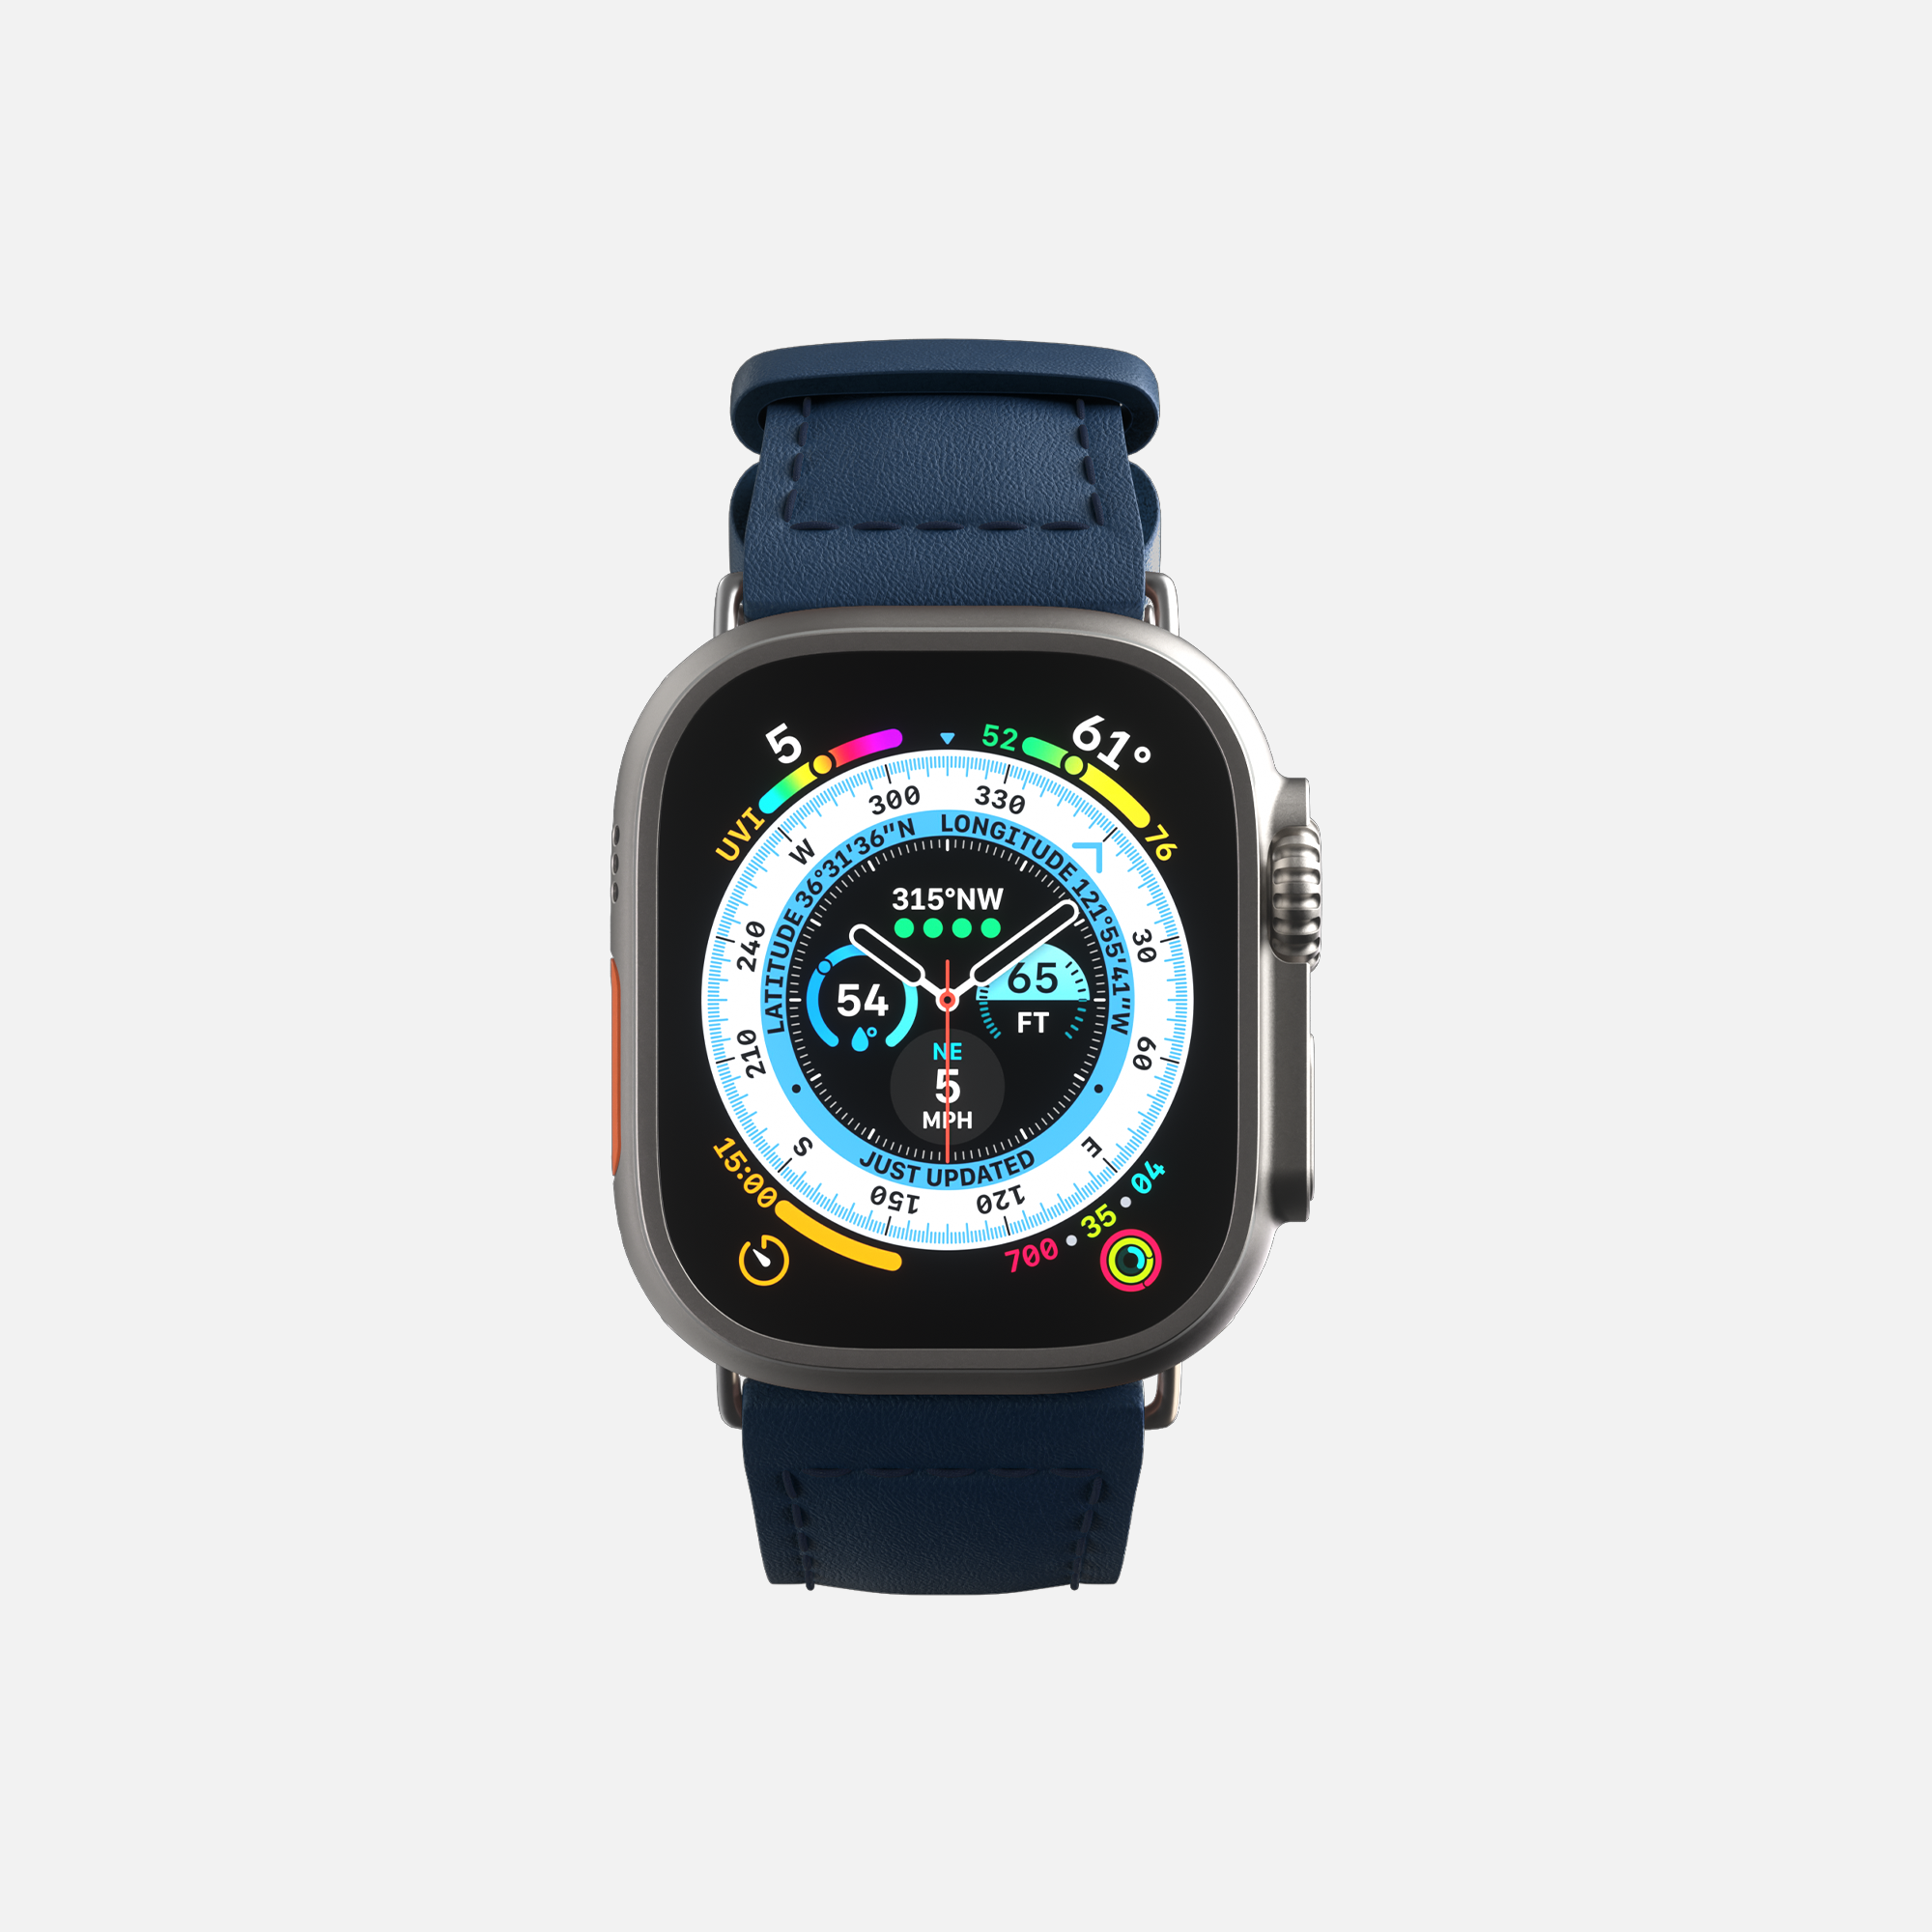 Modern Apple smartwatch with blue strap displaying colorful compass navigation screen on white background.